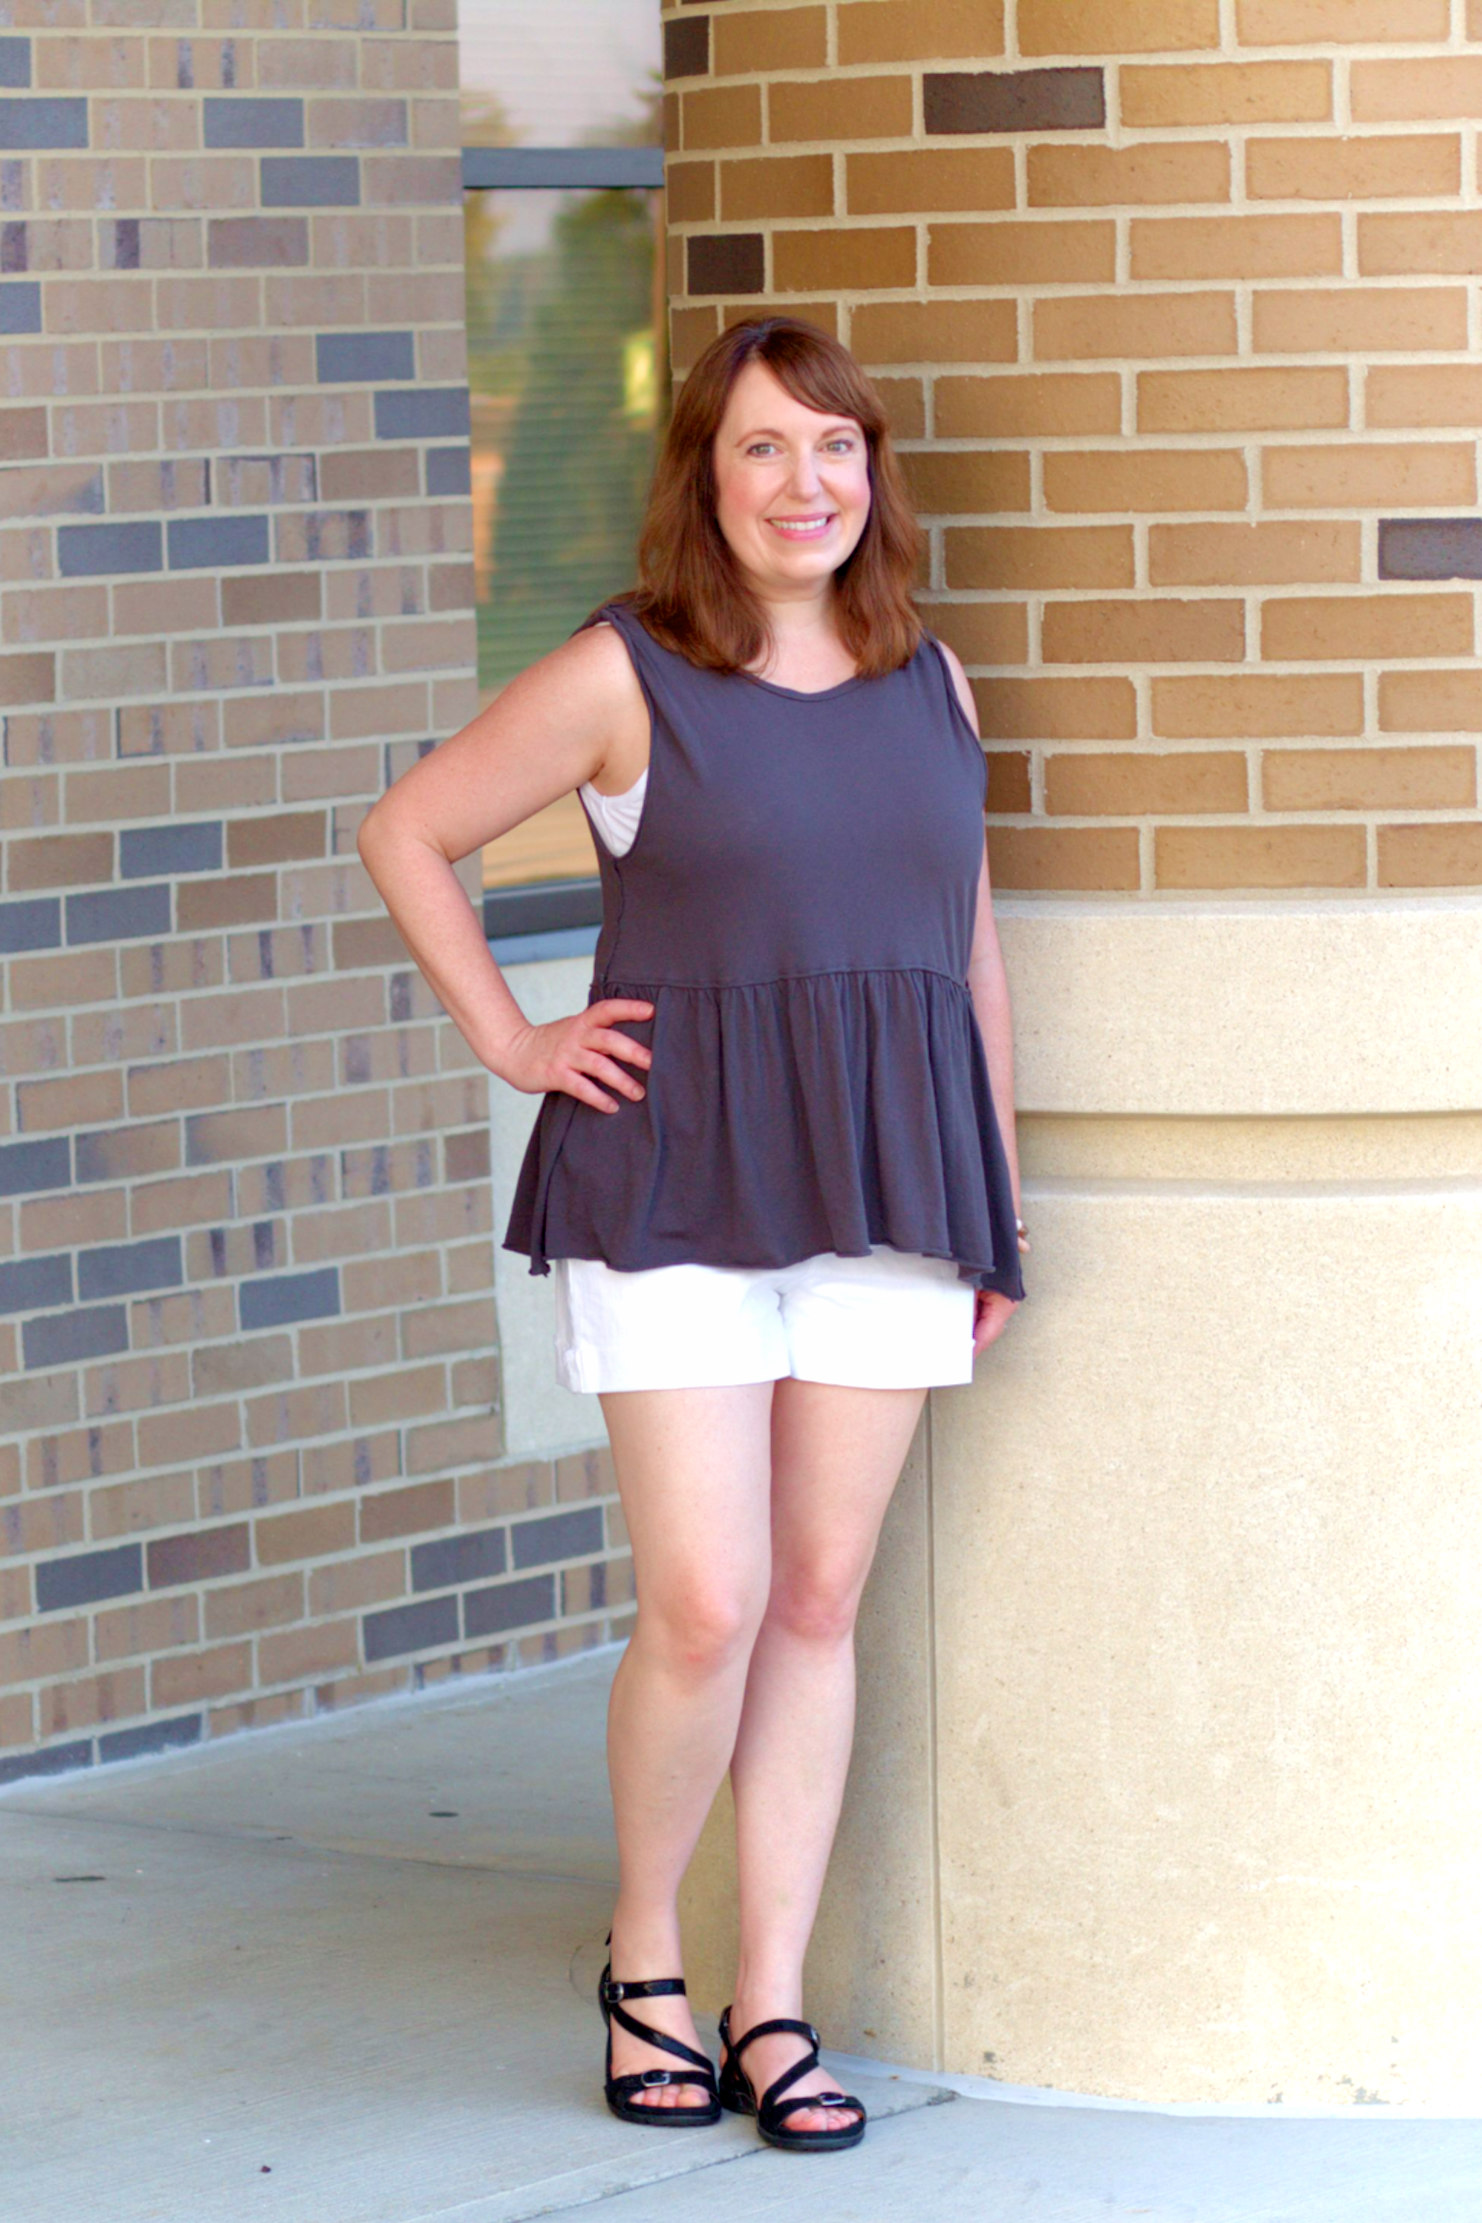 Grey Peplum Top, White Shorts, And Black Sandals